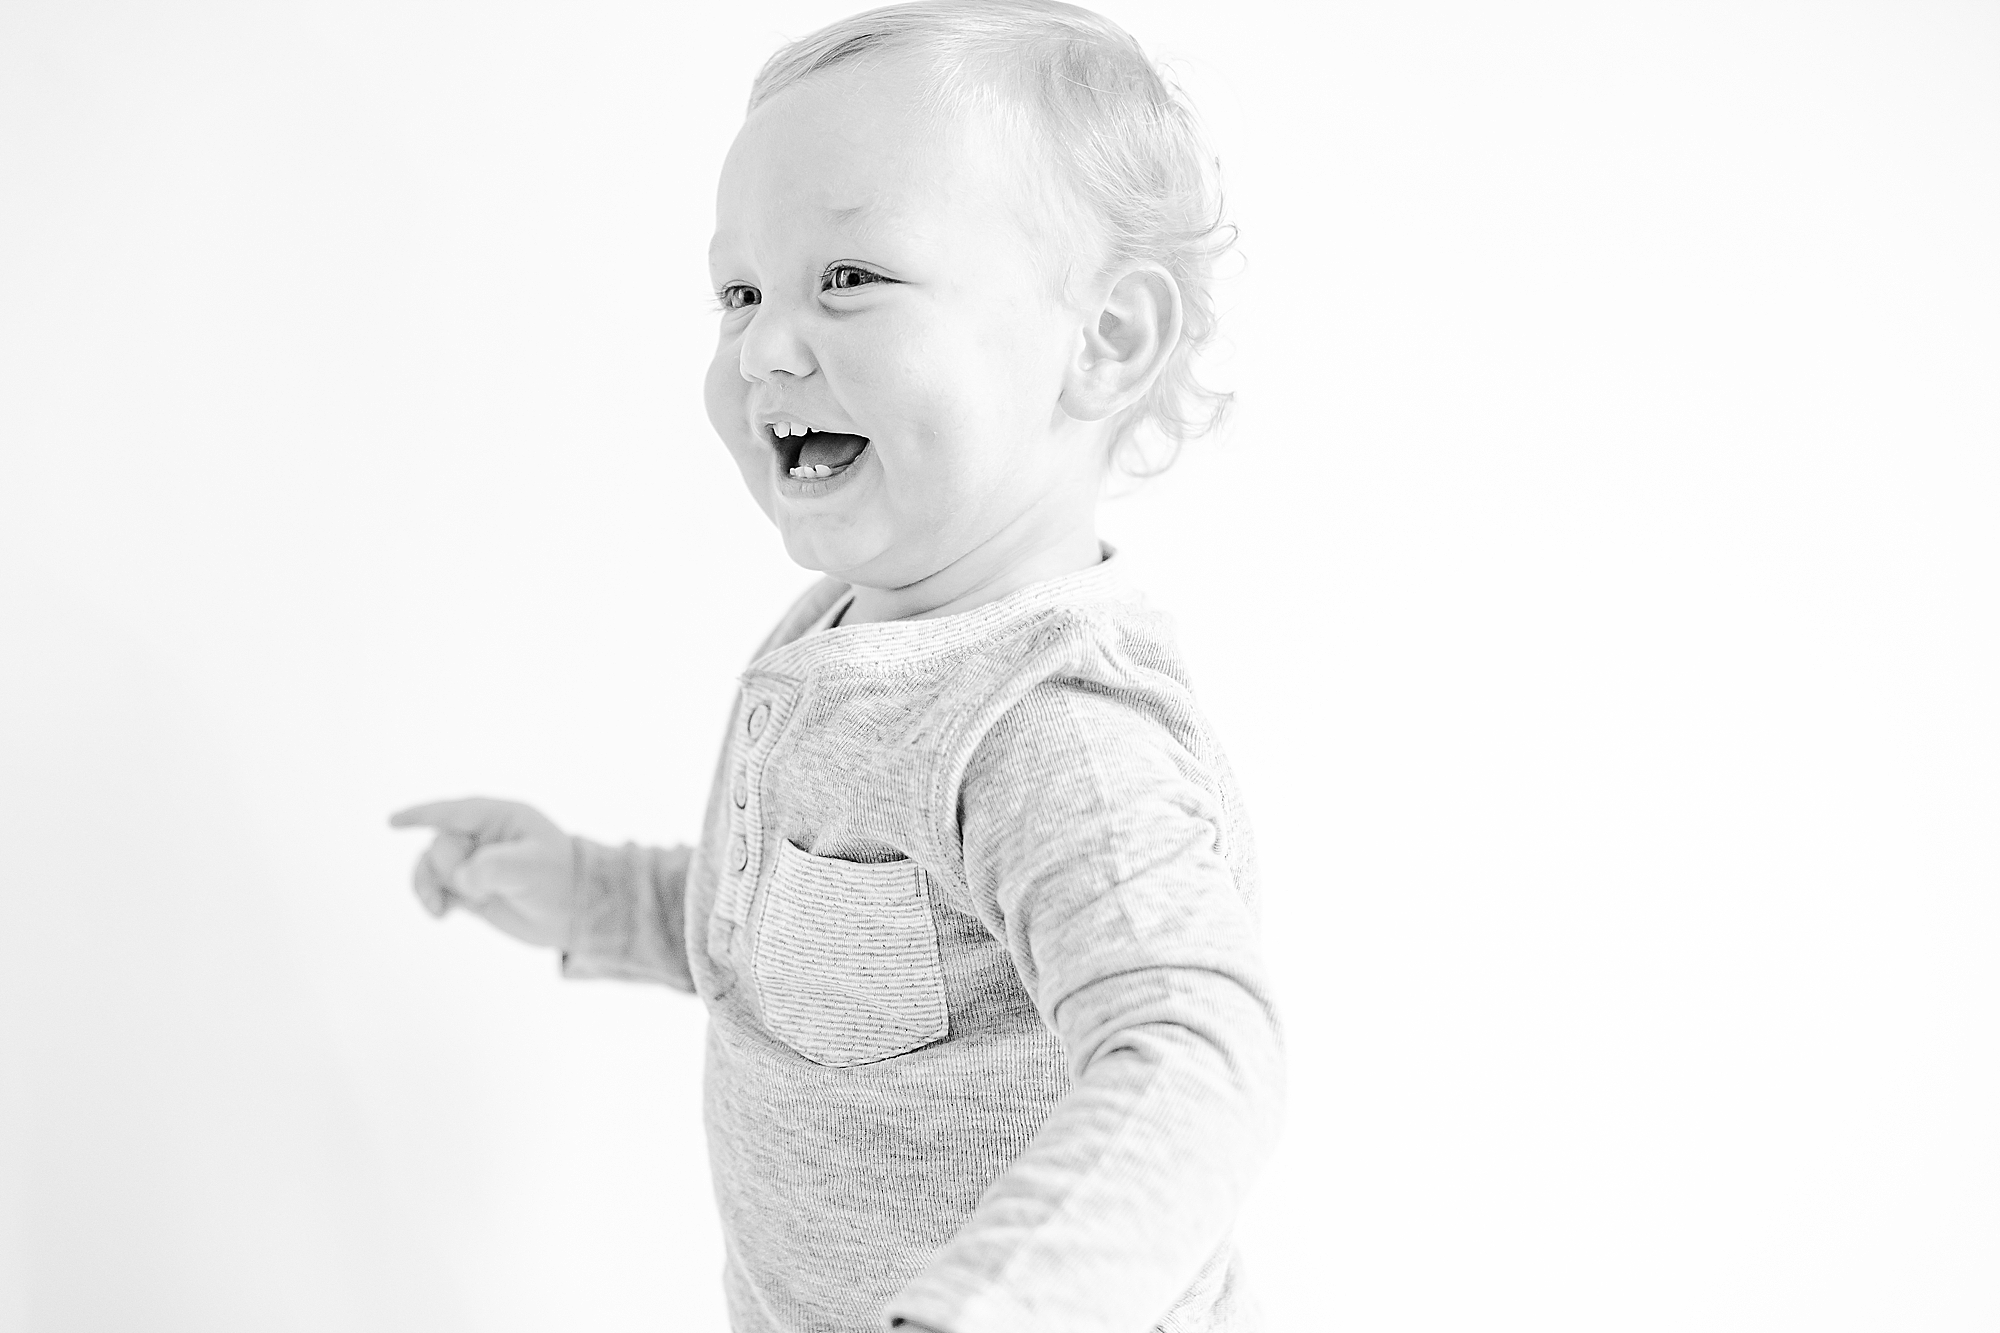 baby laughs during NC studio portraits